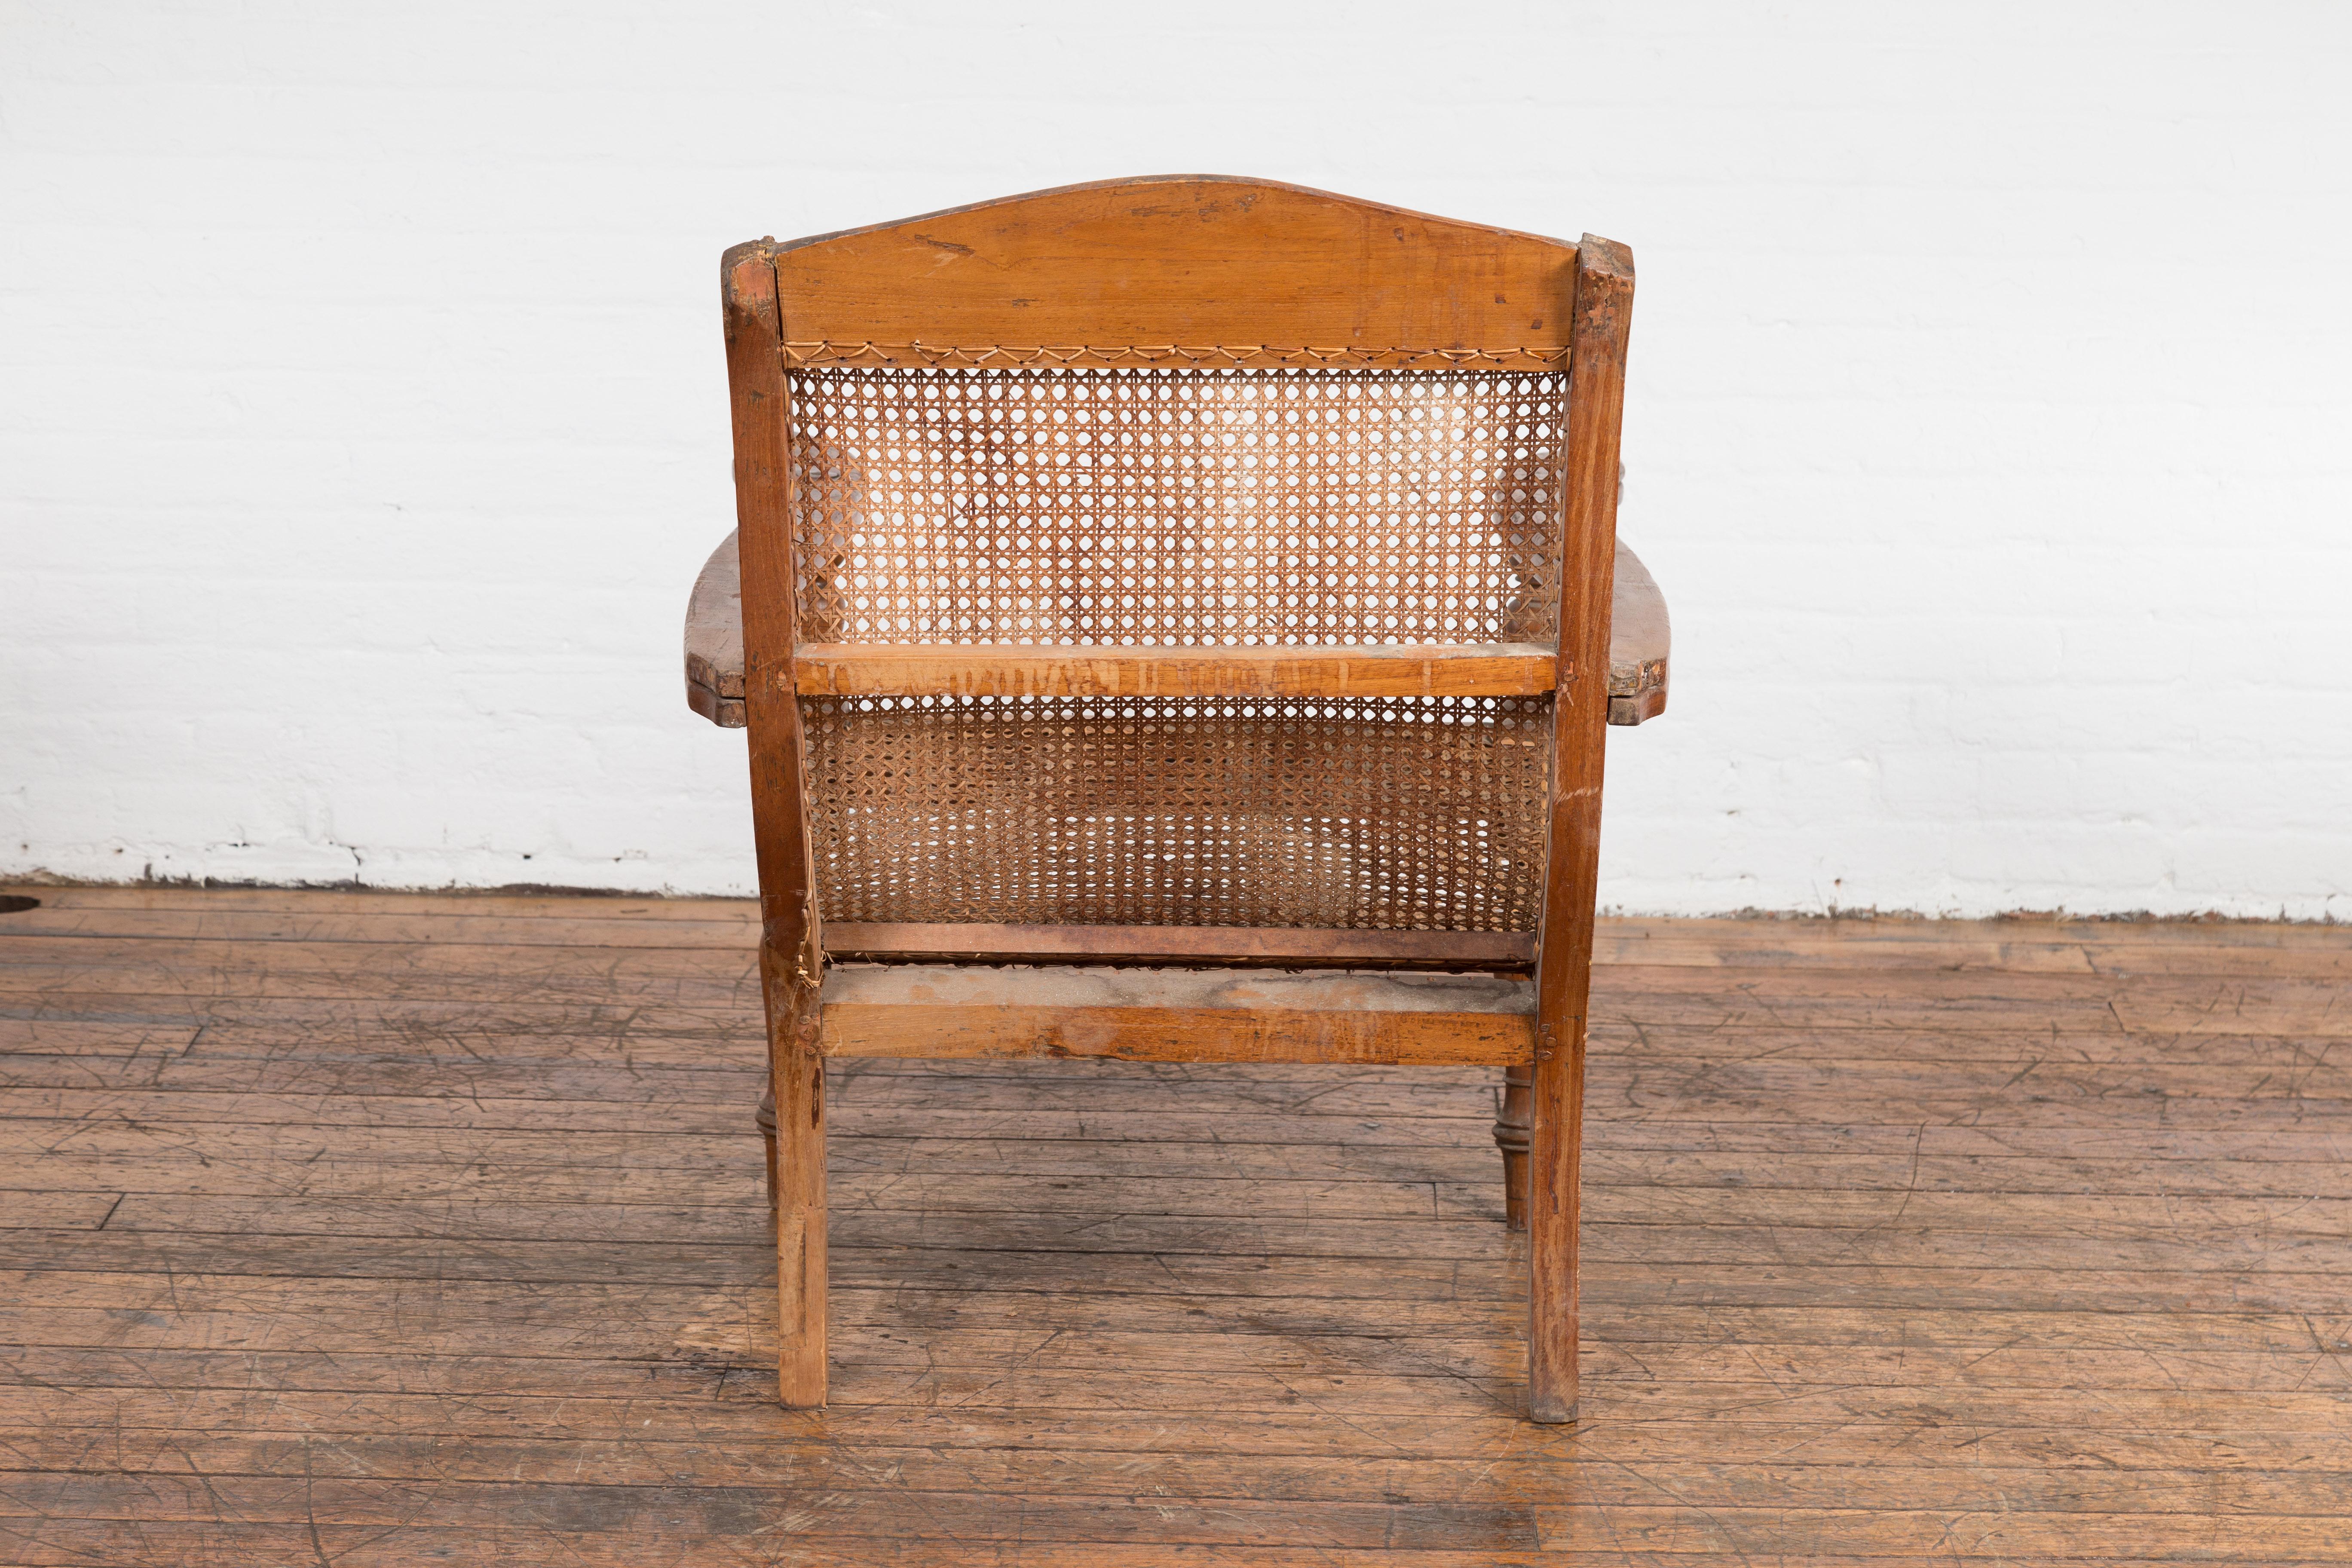 Dutch Colonial Indonesian Cane and Wood Plantation Chair with Extending Arms For Sale 10